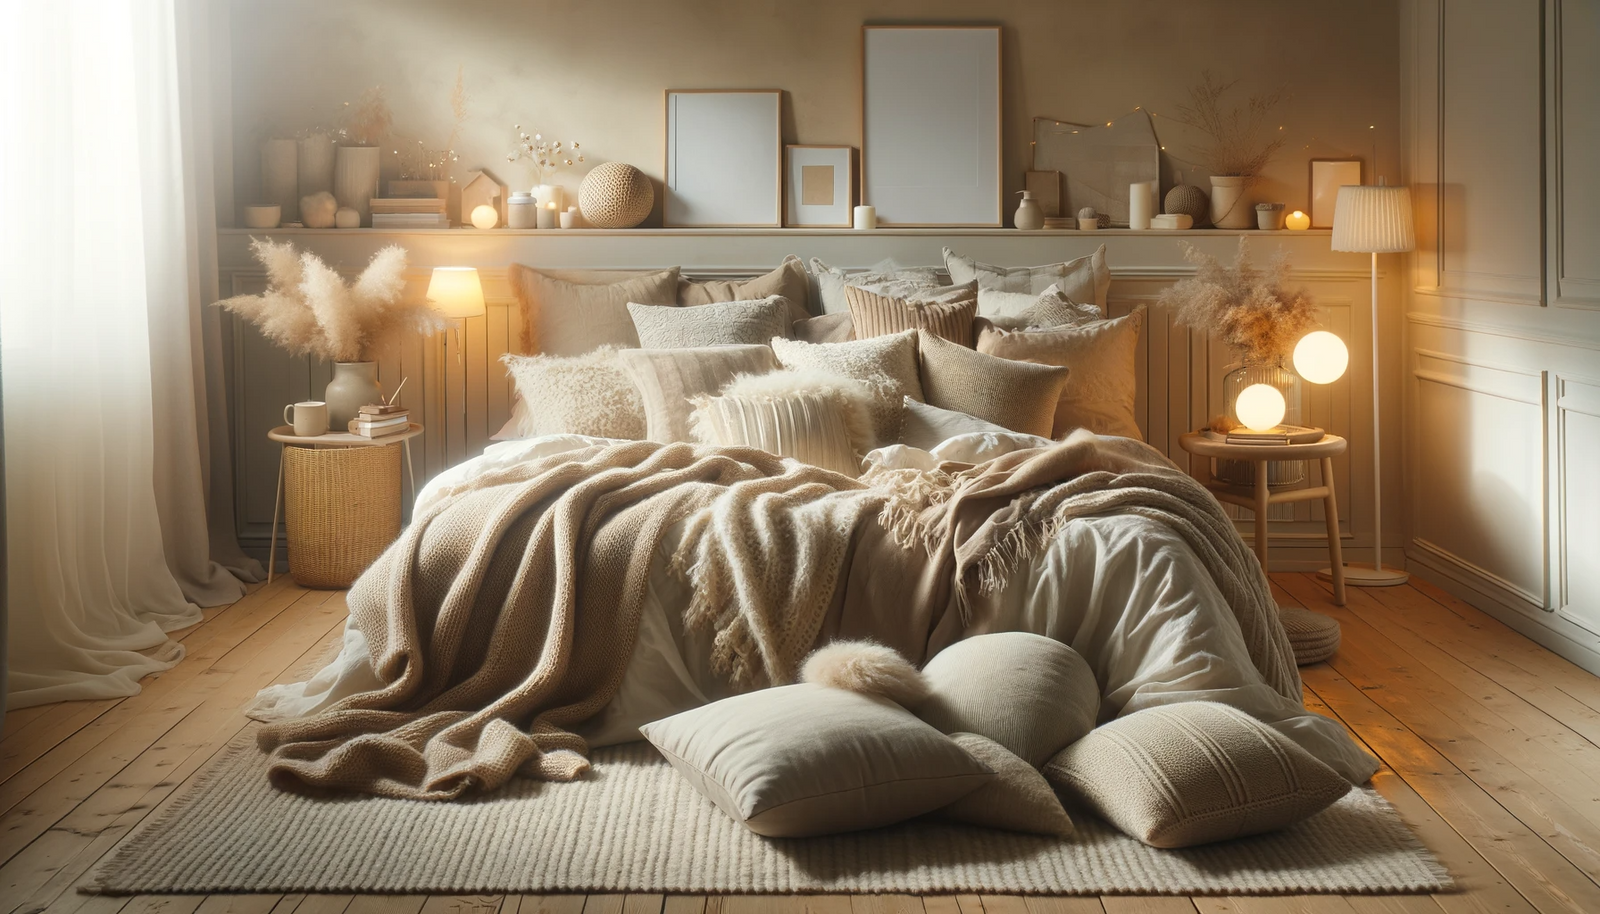 https://realcraft.com/cdn/shop/articles/DALL_E_2023-11-14_13.33.02_-_An_image_of_a_hygge-inspired_bedroom_embodying_a_sense_of_cozy_contentment_and_well-being._The_bedroom_should_be_warm_and_inviting_with_a_serene_and_1600x.png?v=1699997874